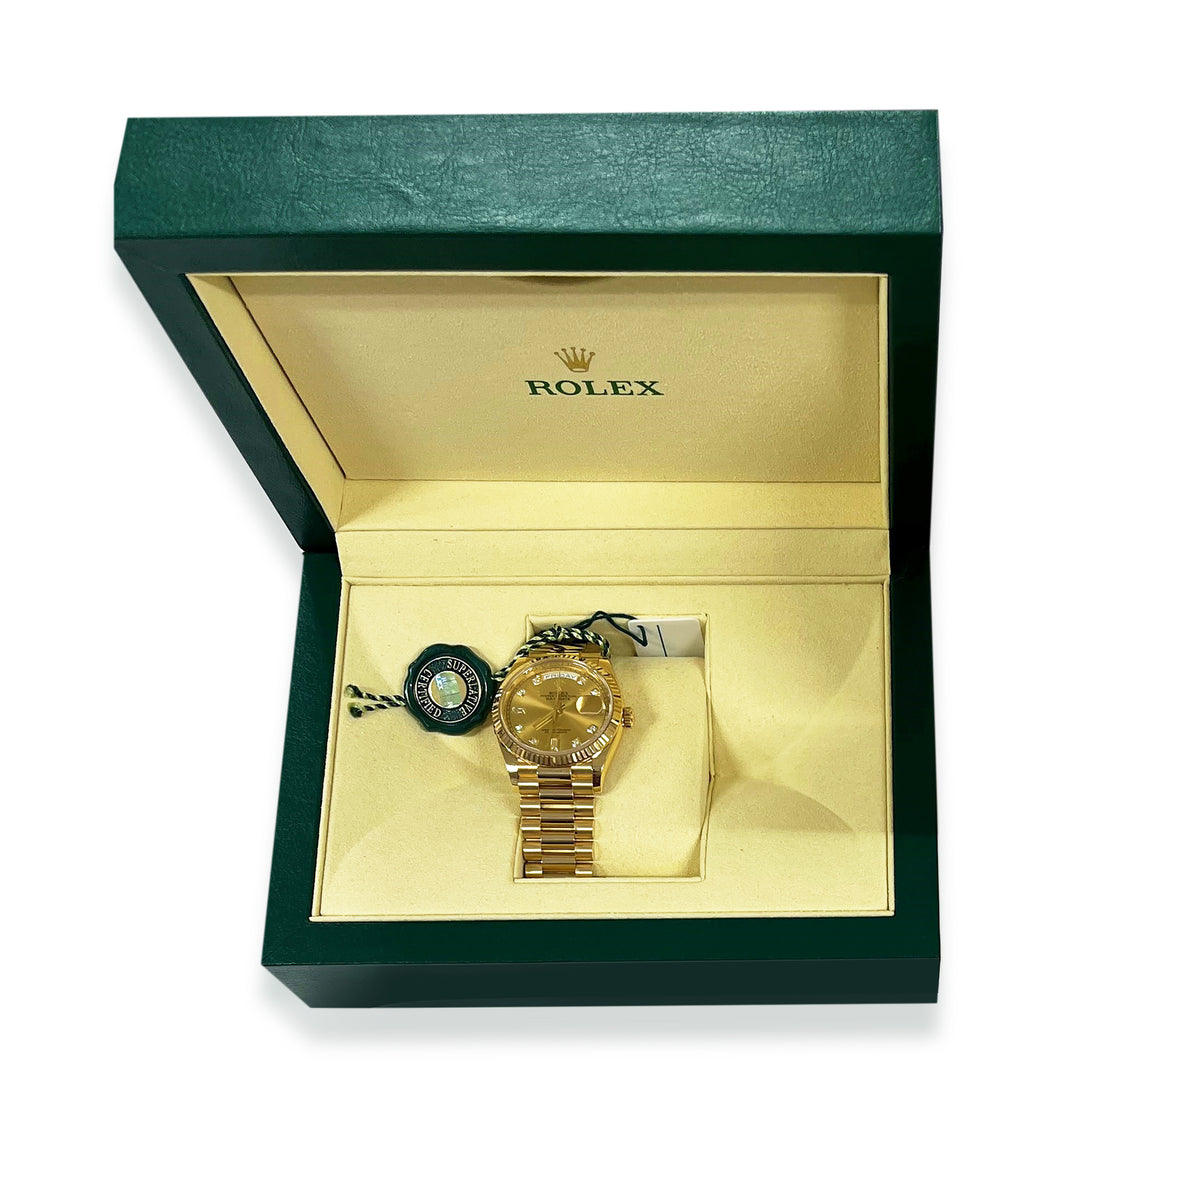 Rolex Day-Date 128238 Men's Watch in 18kt Yellow Gold